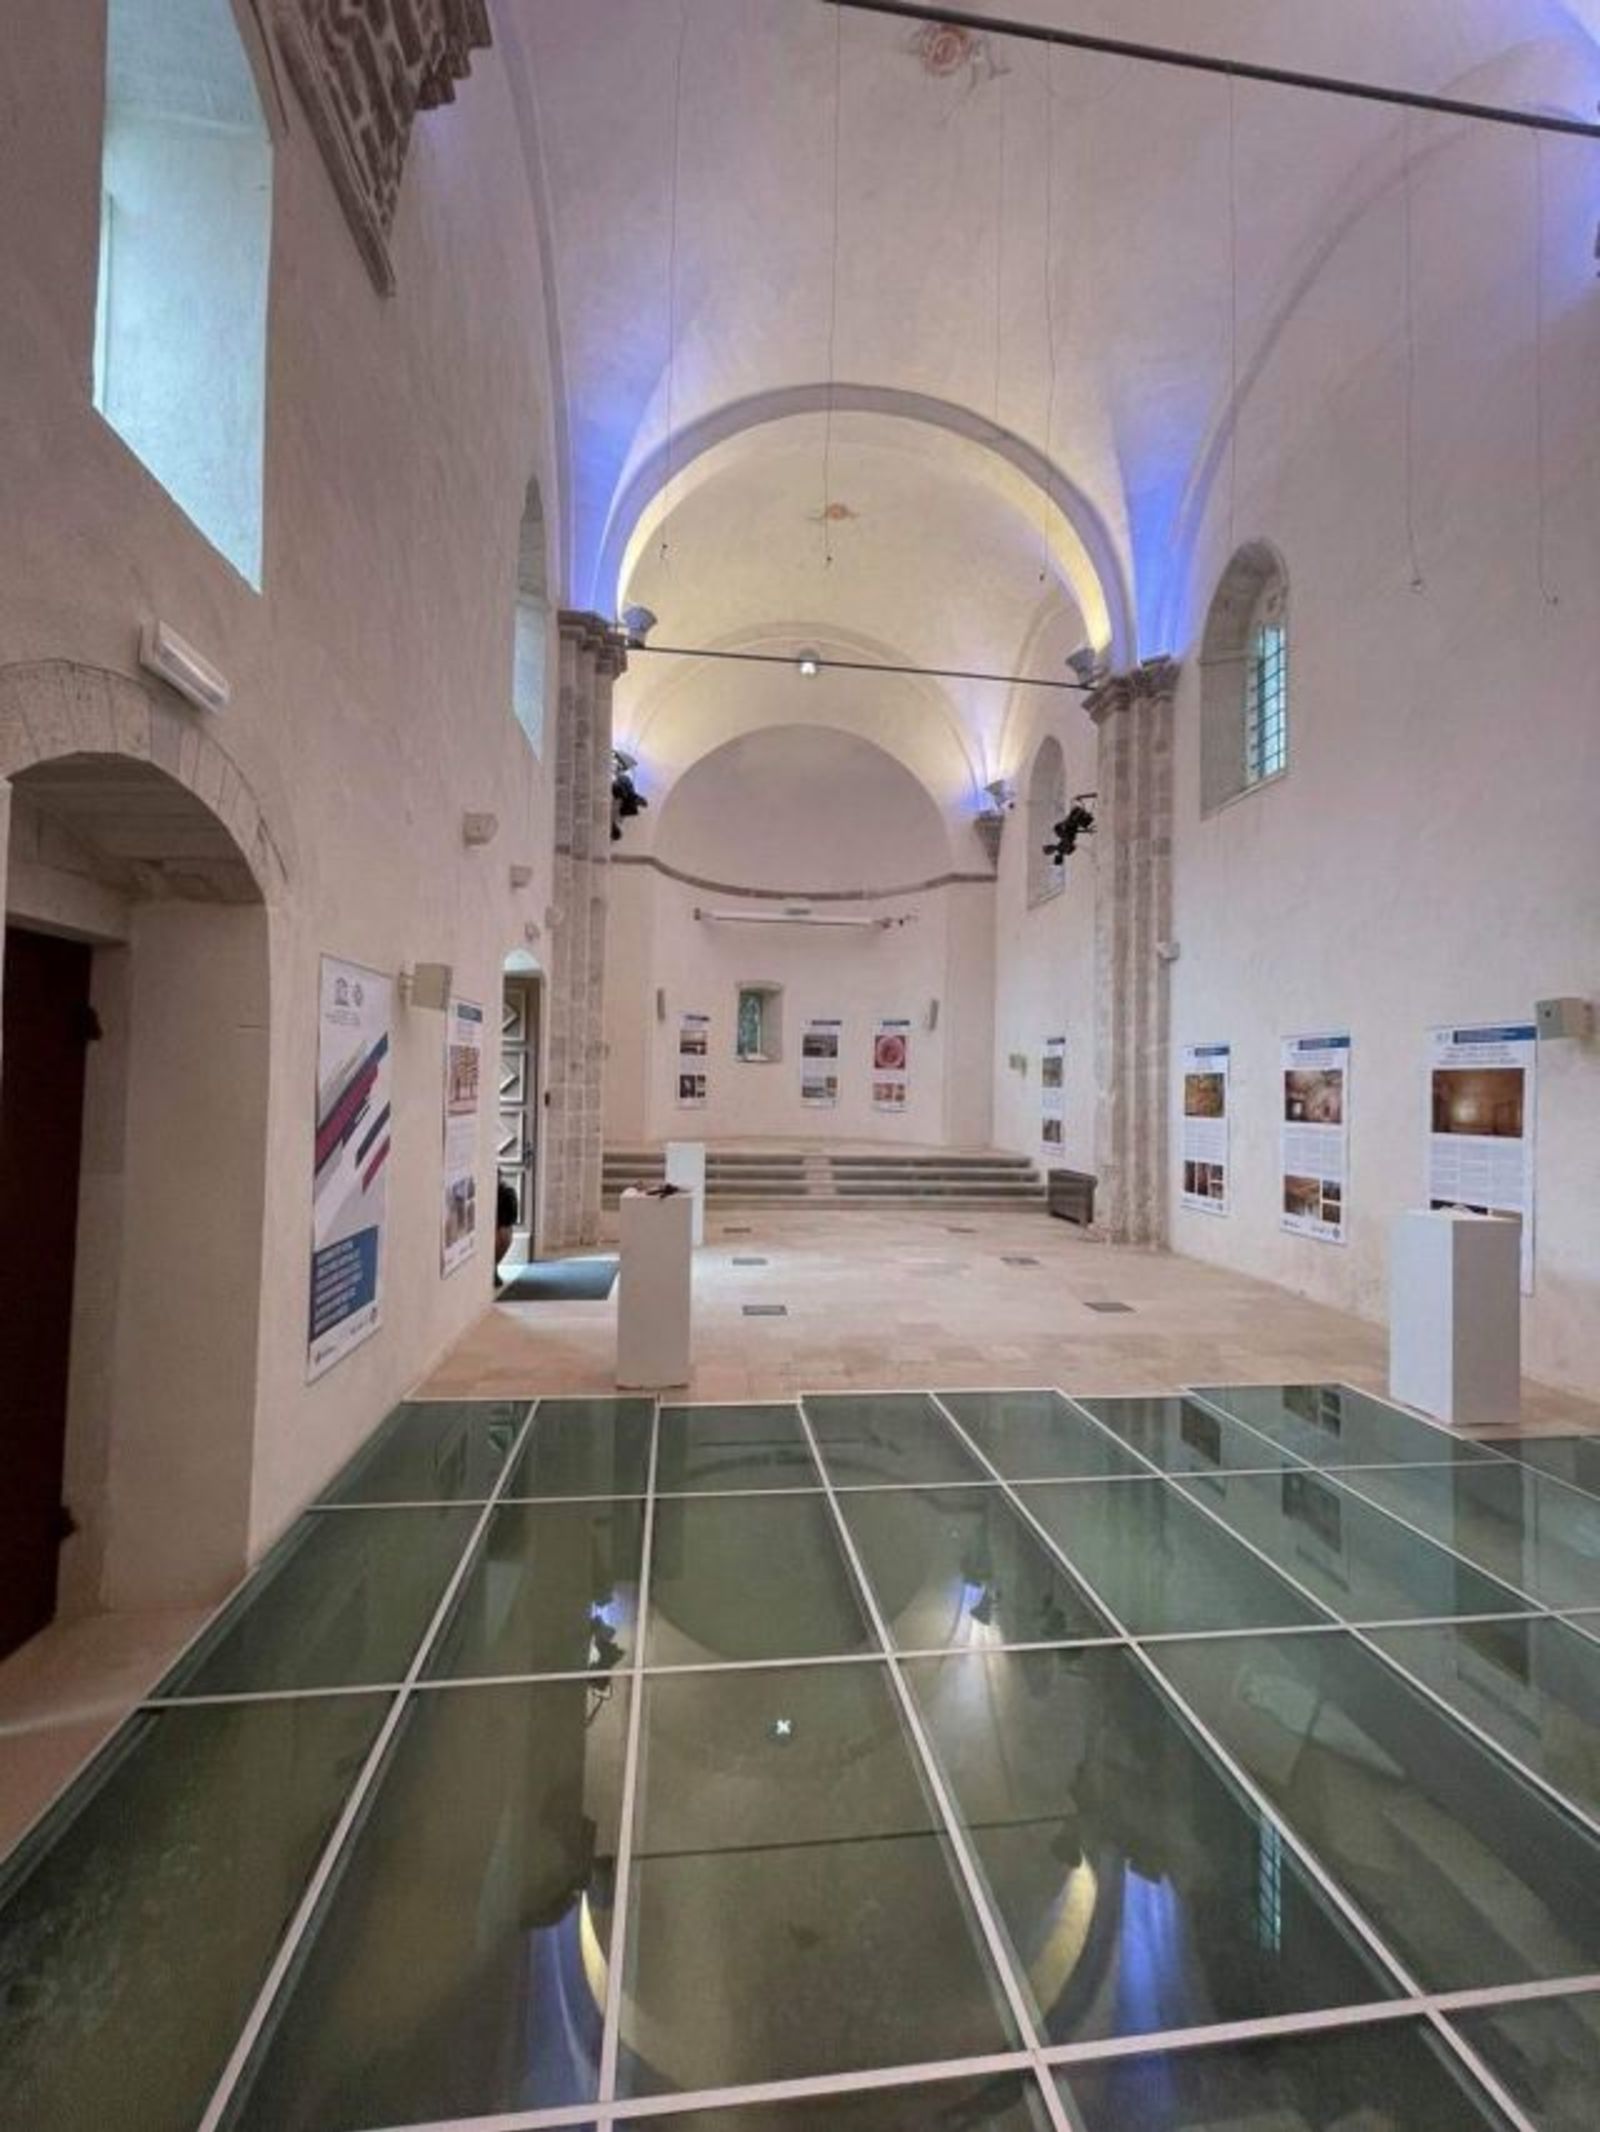 The Exhibition "Bulgarian Monuments under the Protection of UNESCO" is Visiting Montenegro